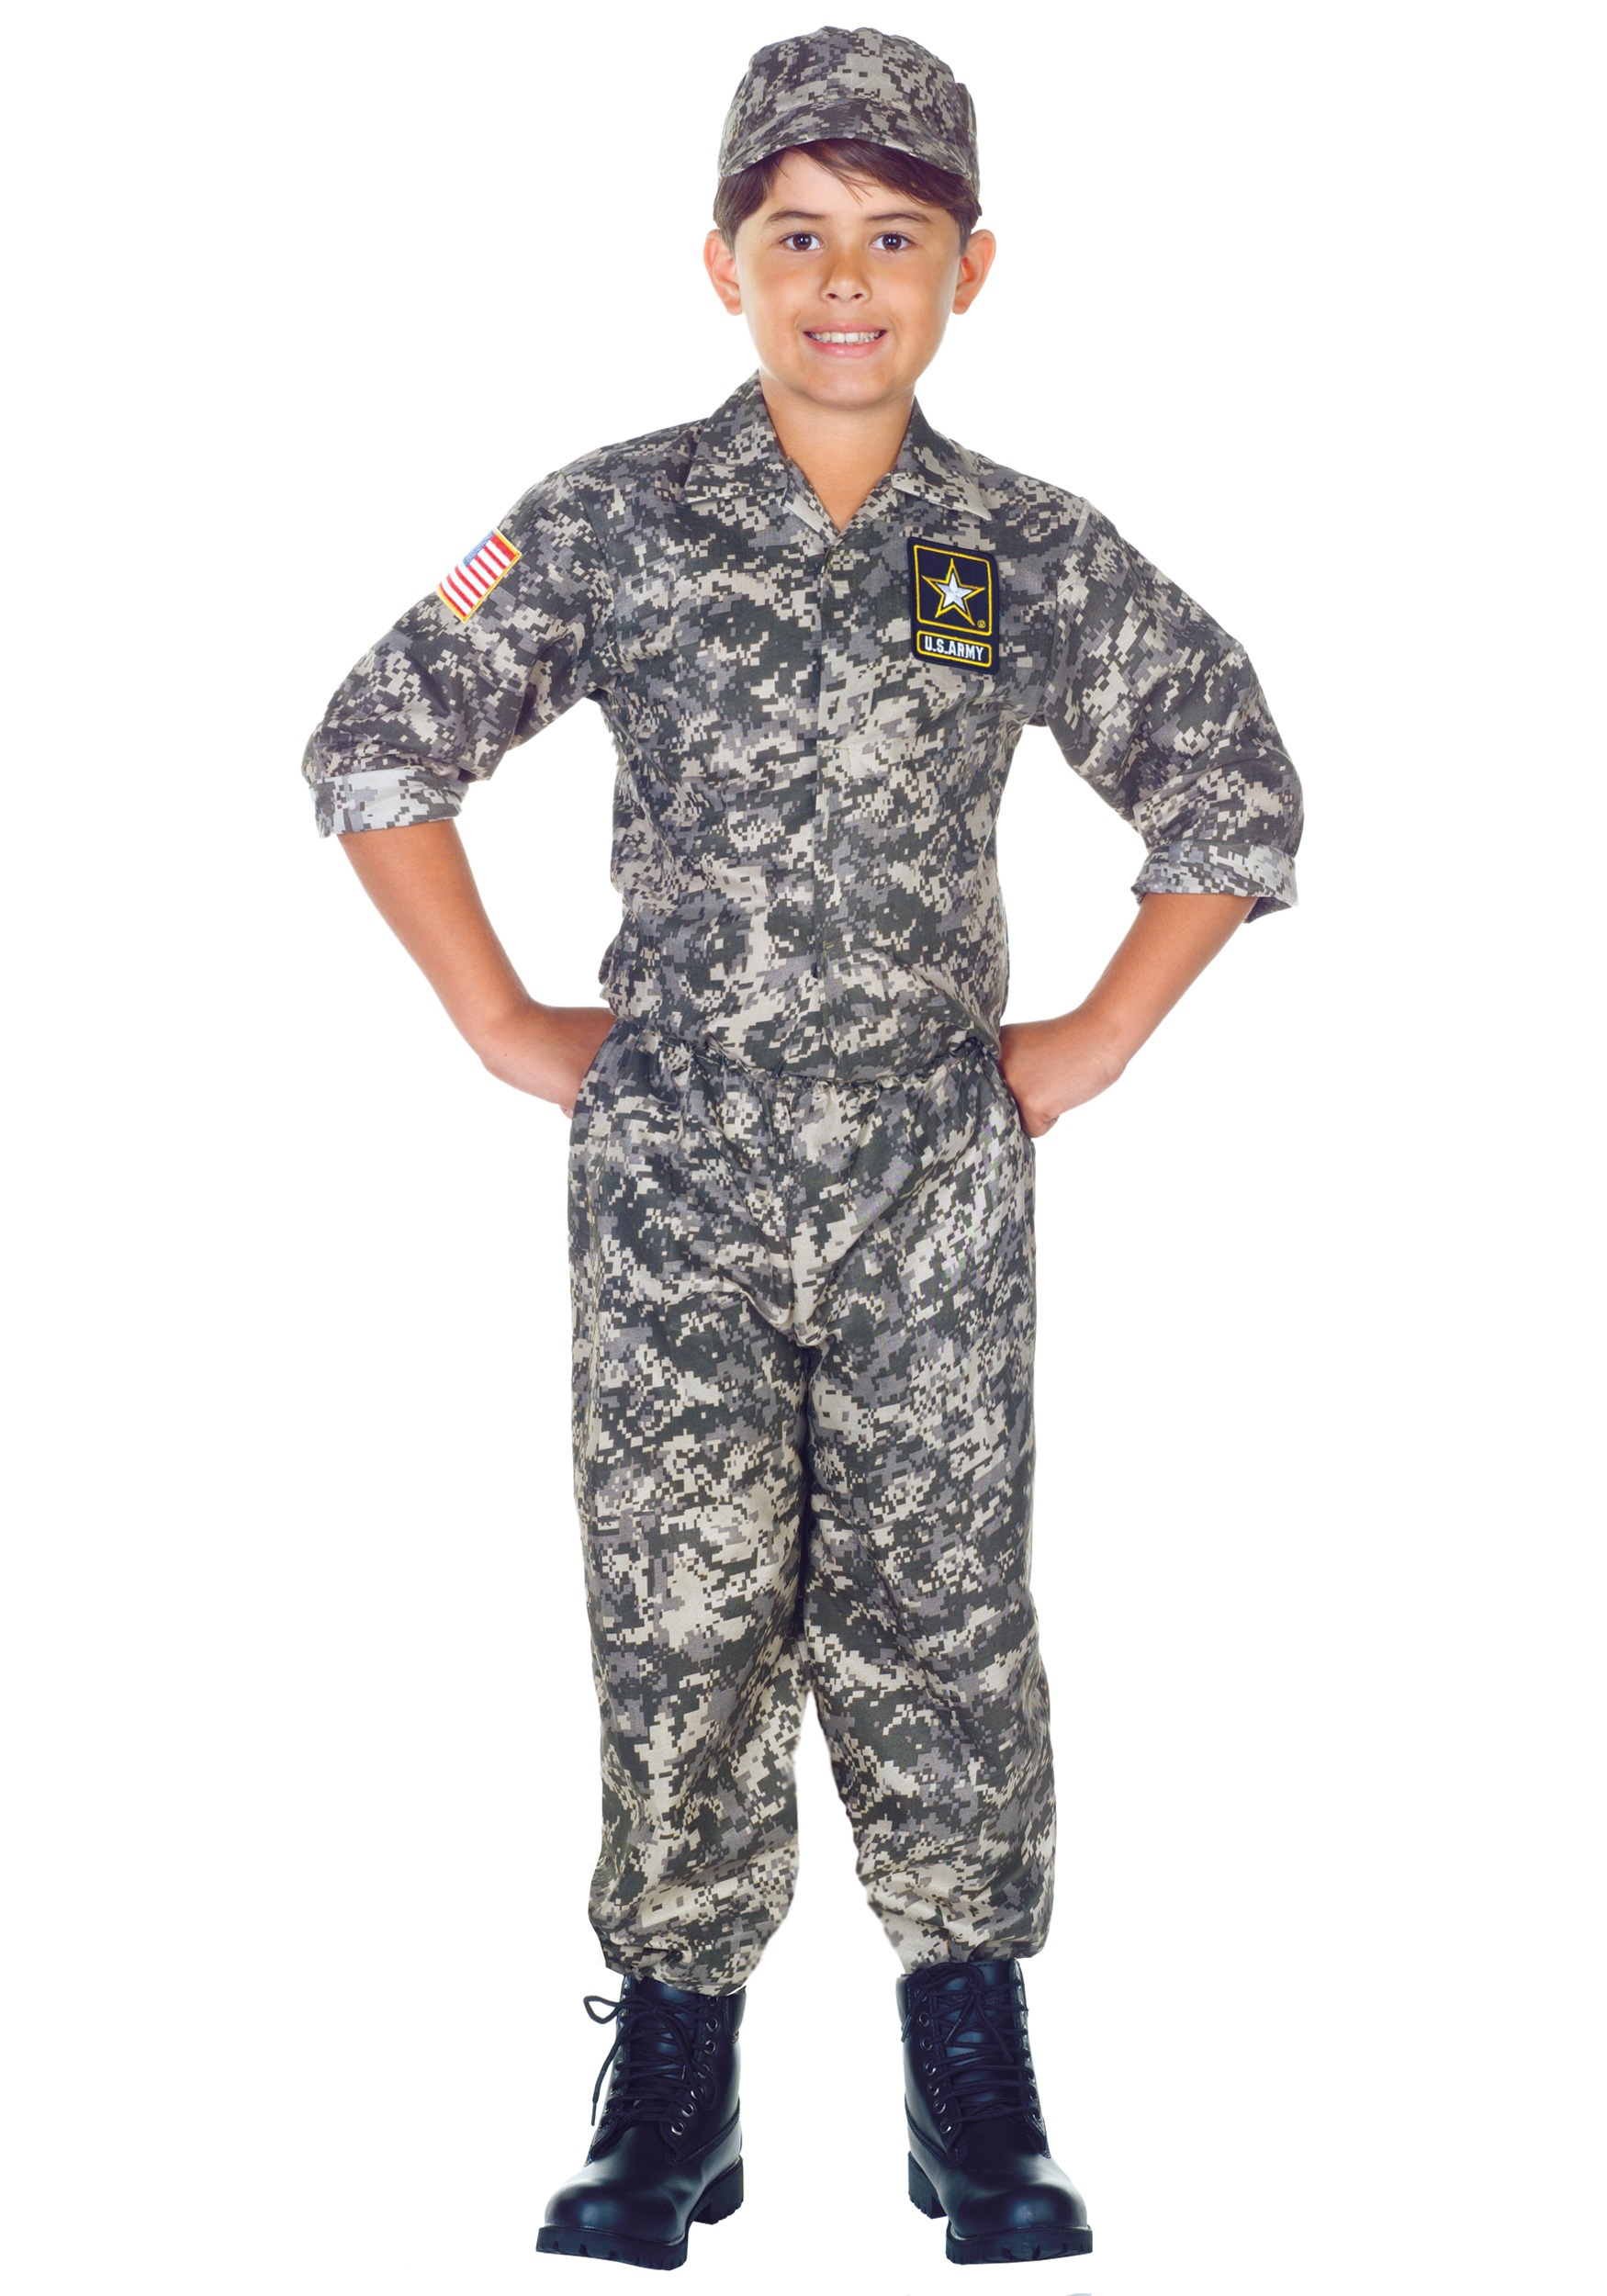 Army Camo Costume for Kids